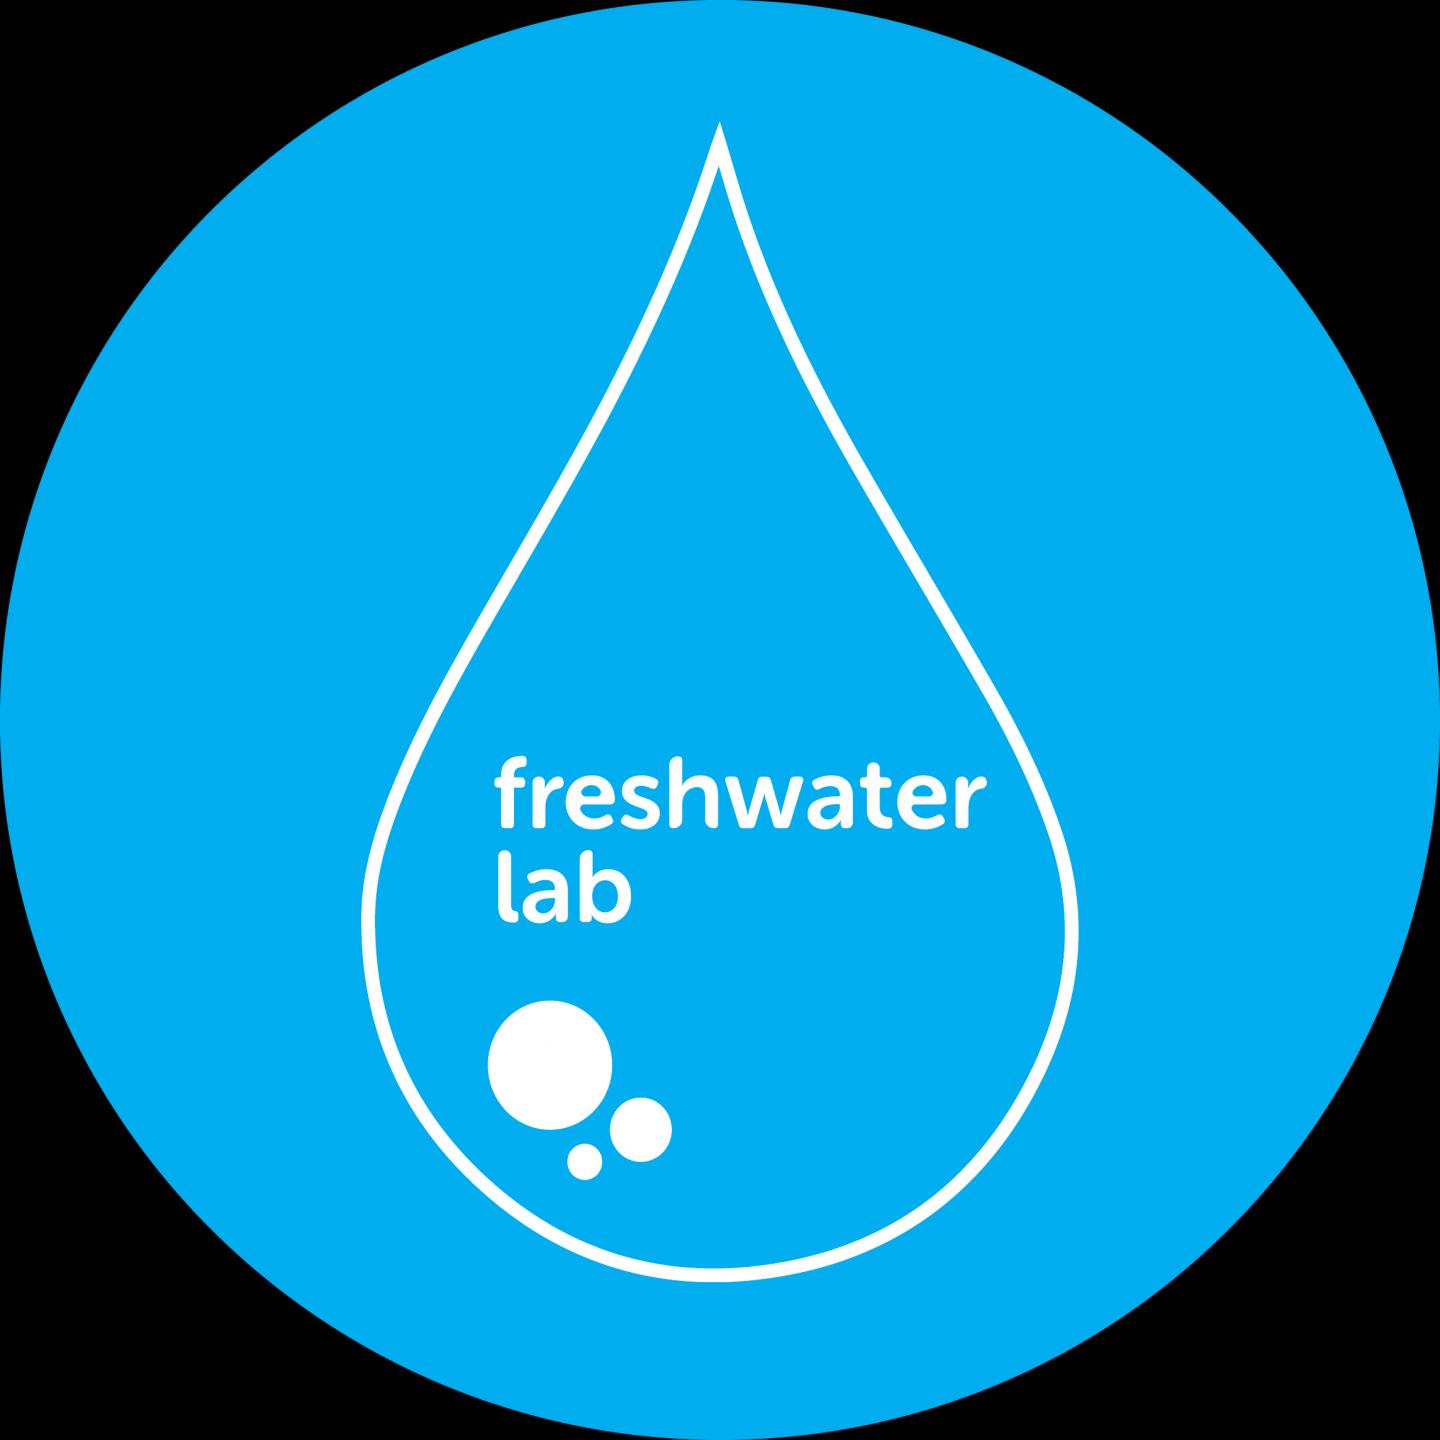 The Freshwater Lab